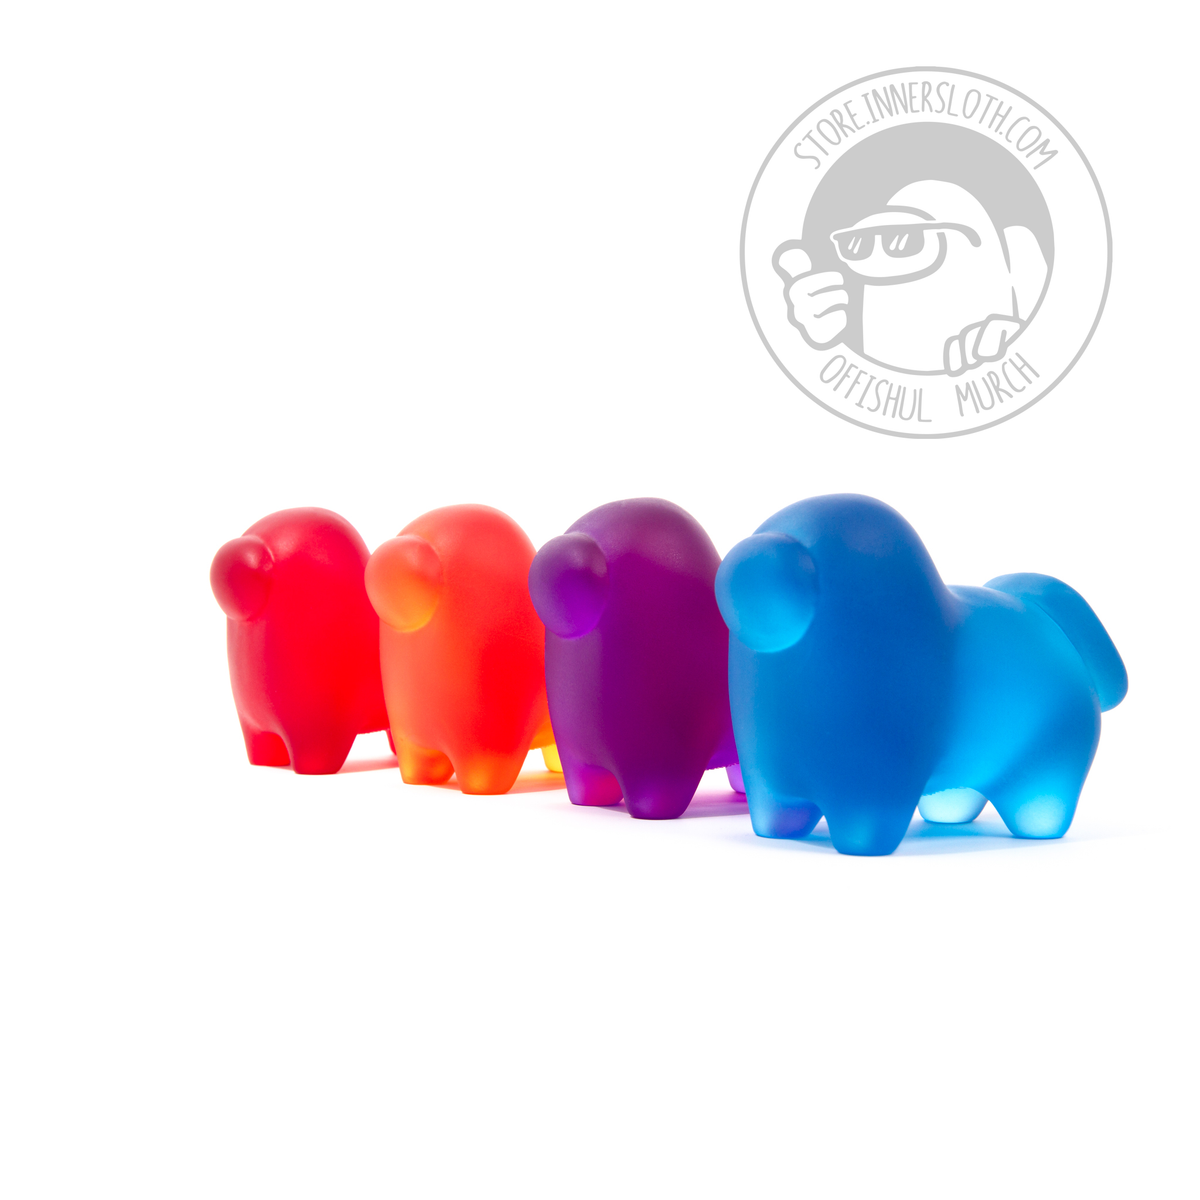 A photograph of all four translucent Crewgi Figurines on a white background. They are standing side-by-side in a diagonal 3/4 profile view standing shoulder to shoulder. The order of Crewgis left to right is red, orange, purple, blue.  